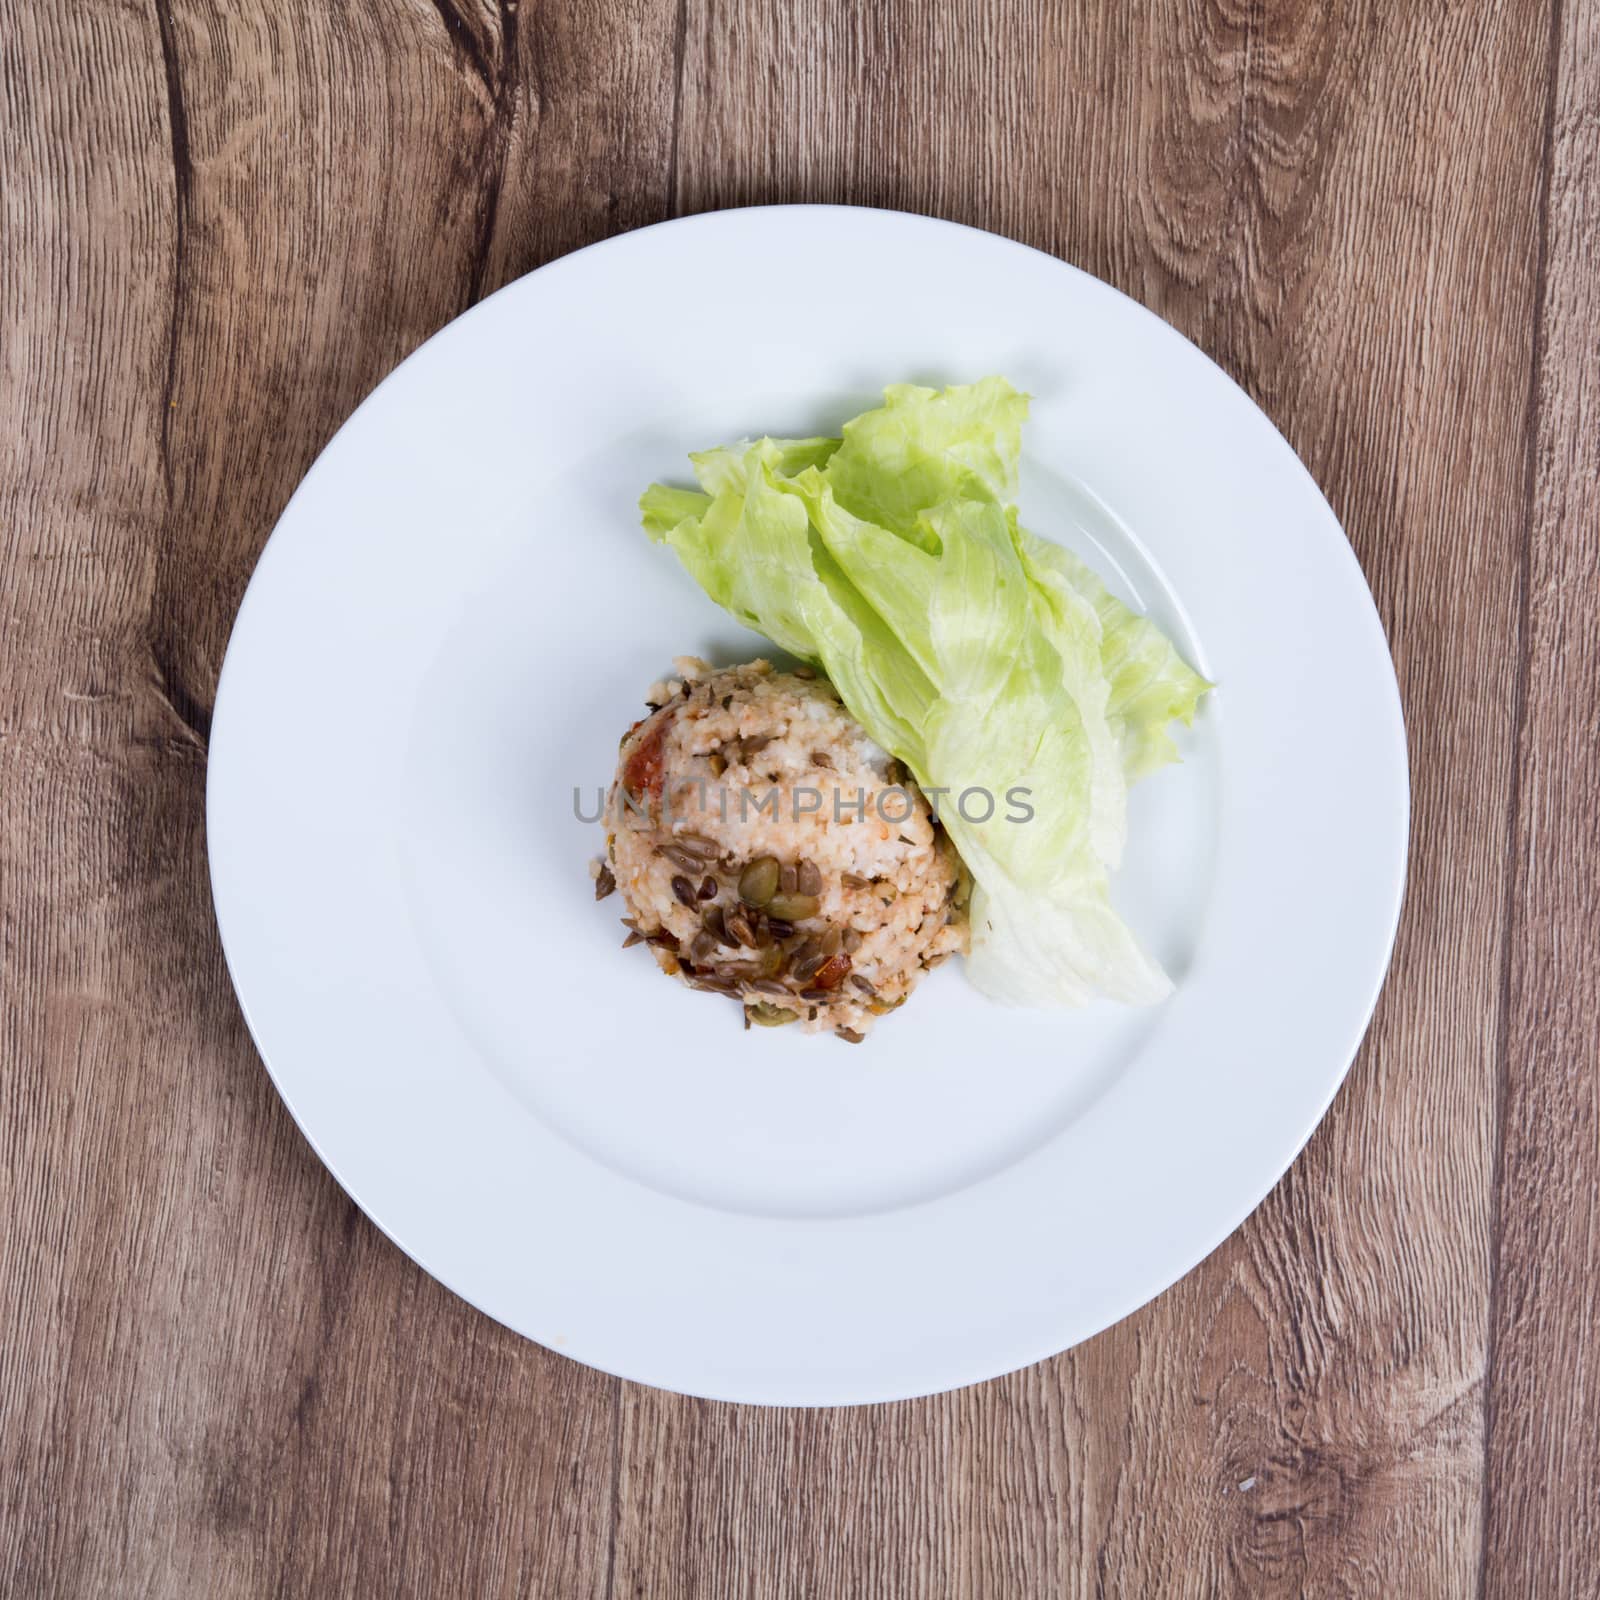 Vegetarian food on a white plate with wooden background